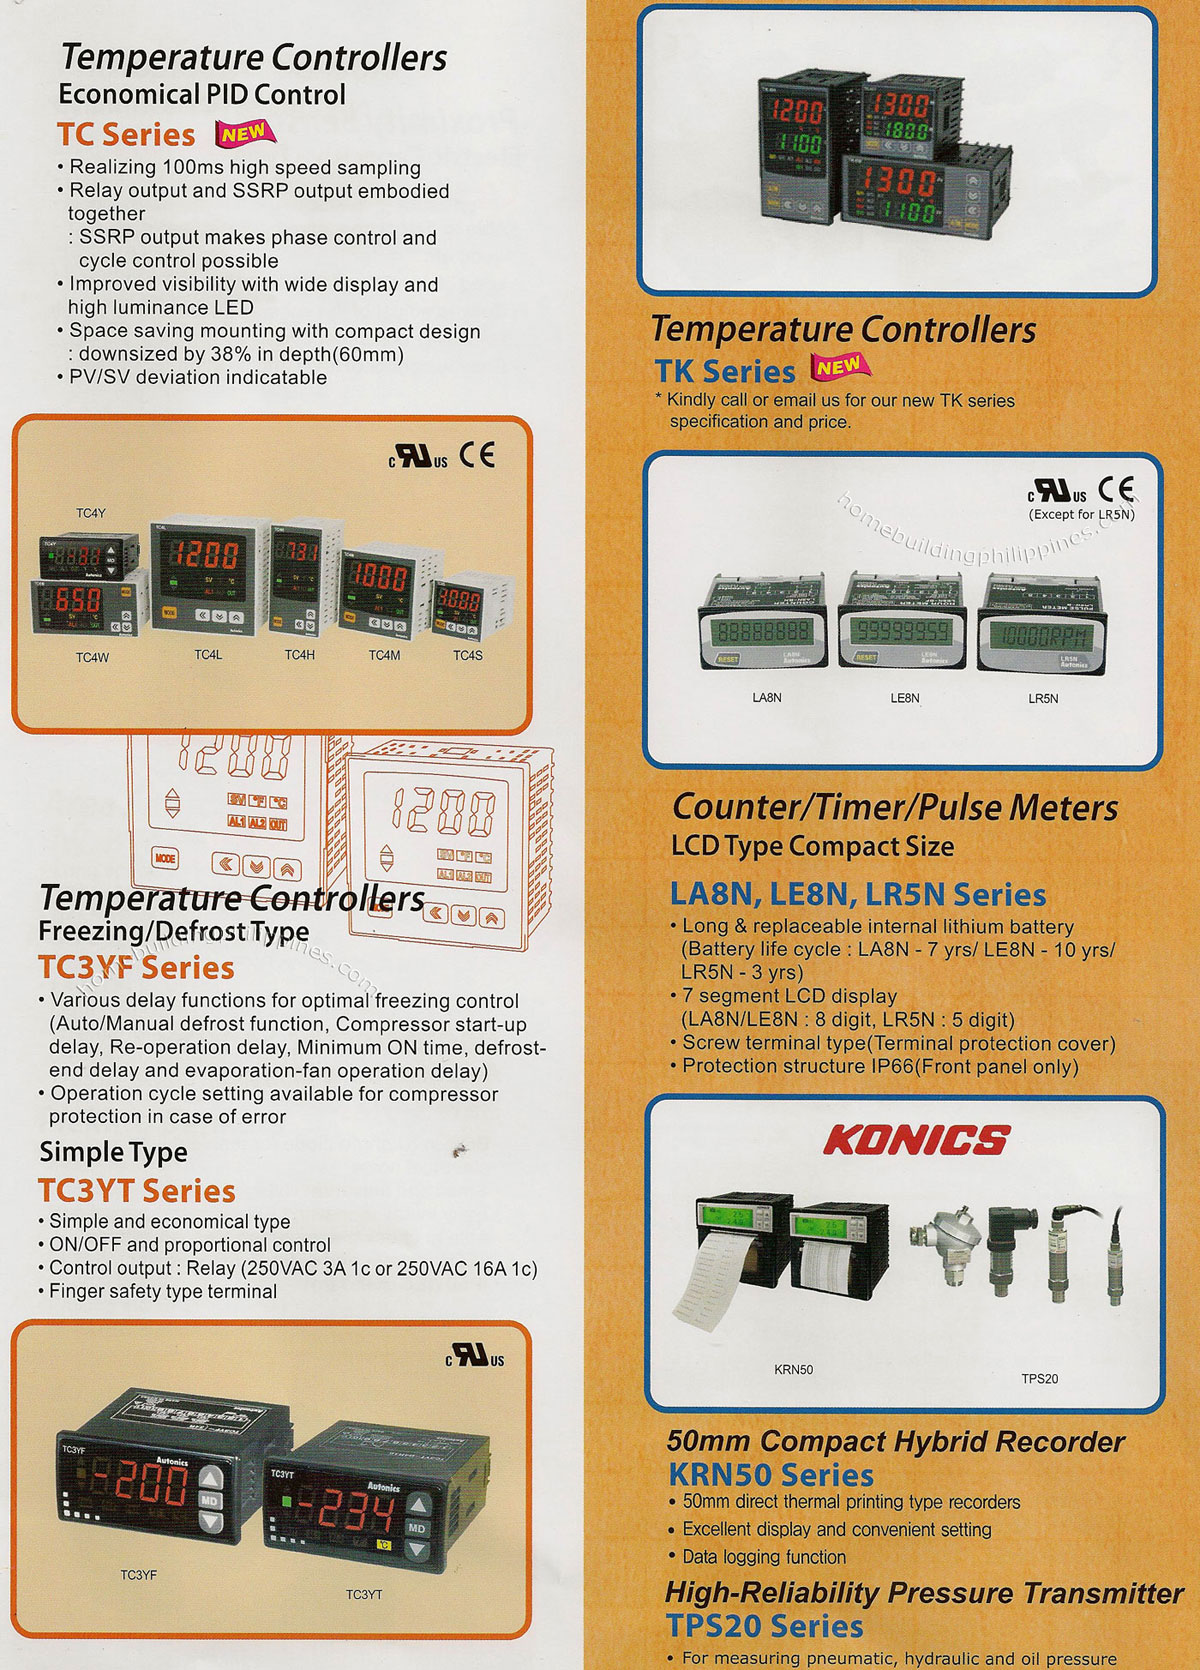 Temperature Controllers, Counter, Timer, Pulse Meters